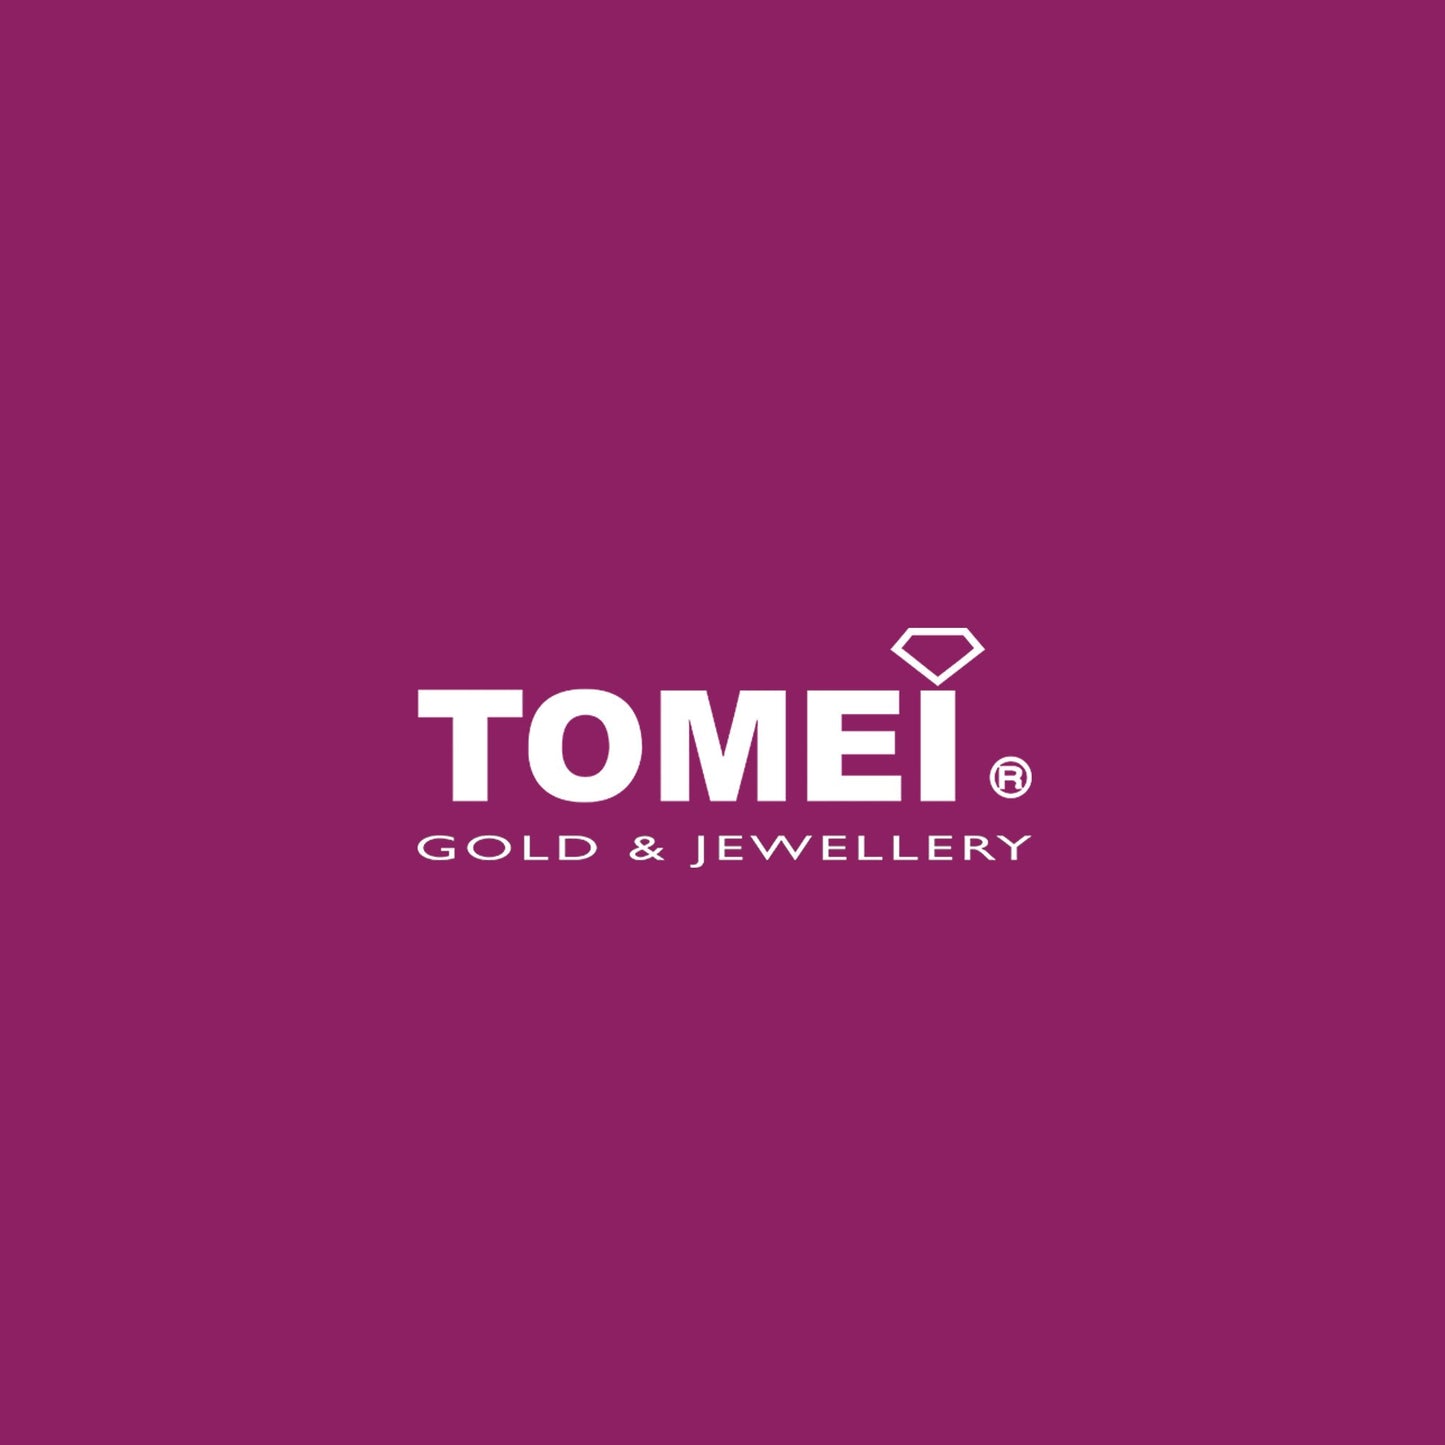 TOMEI Love Forever Bracelet, Yellow Gold 916